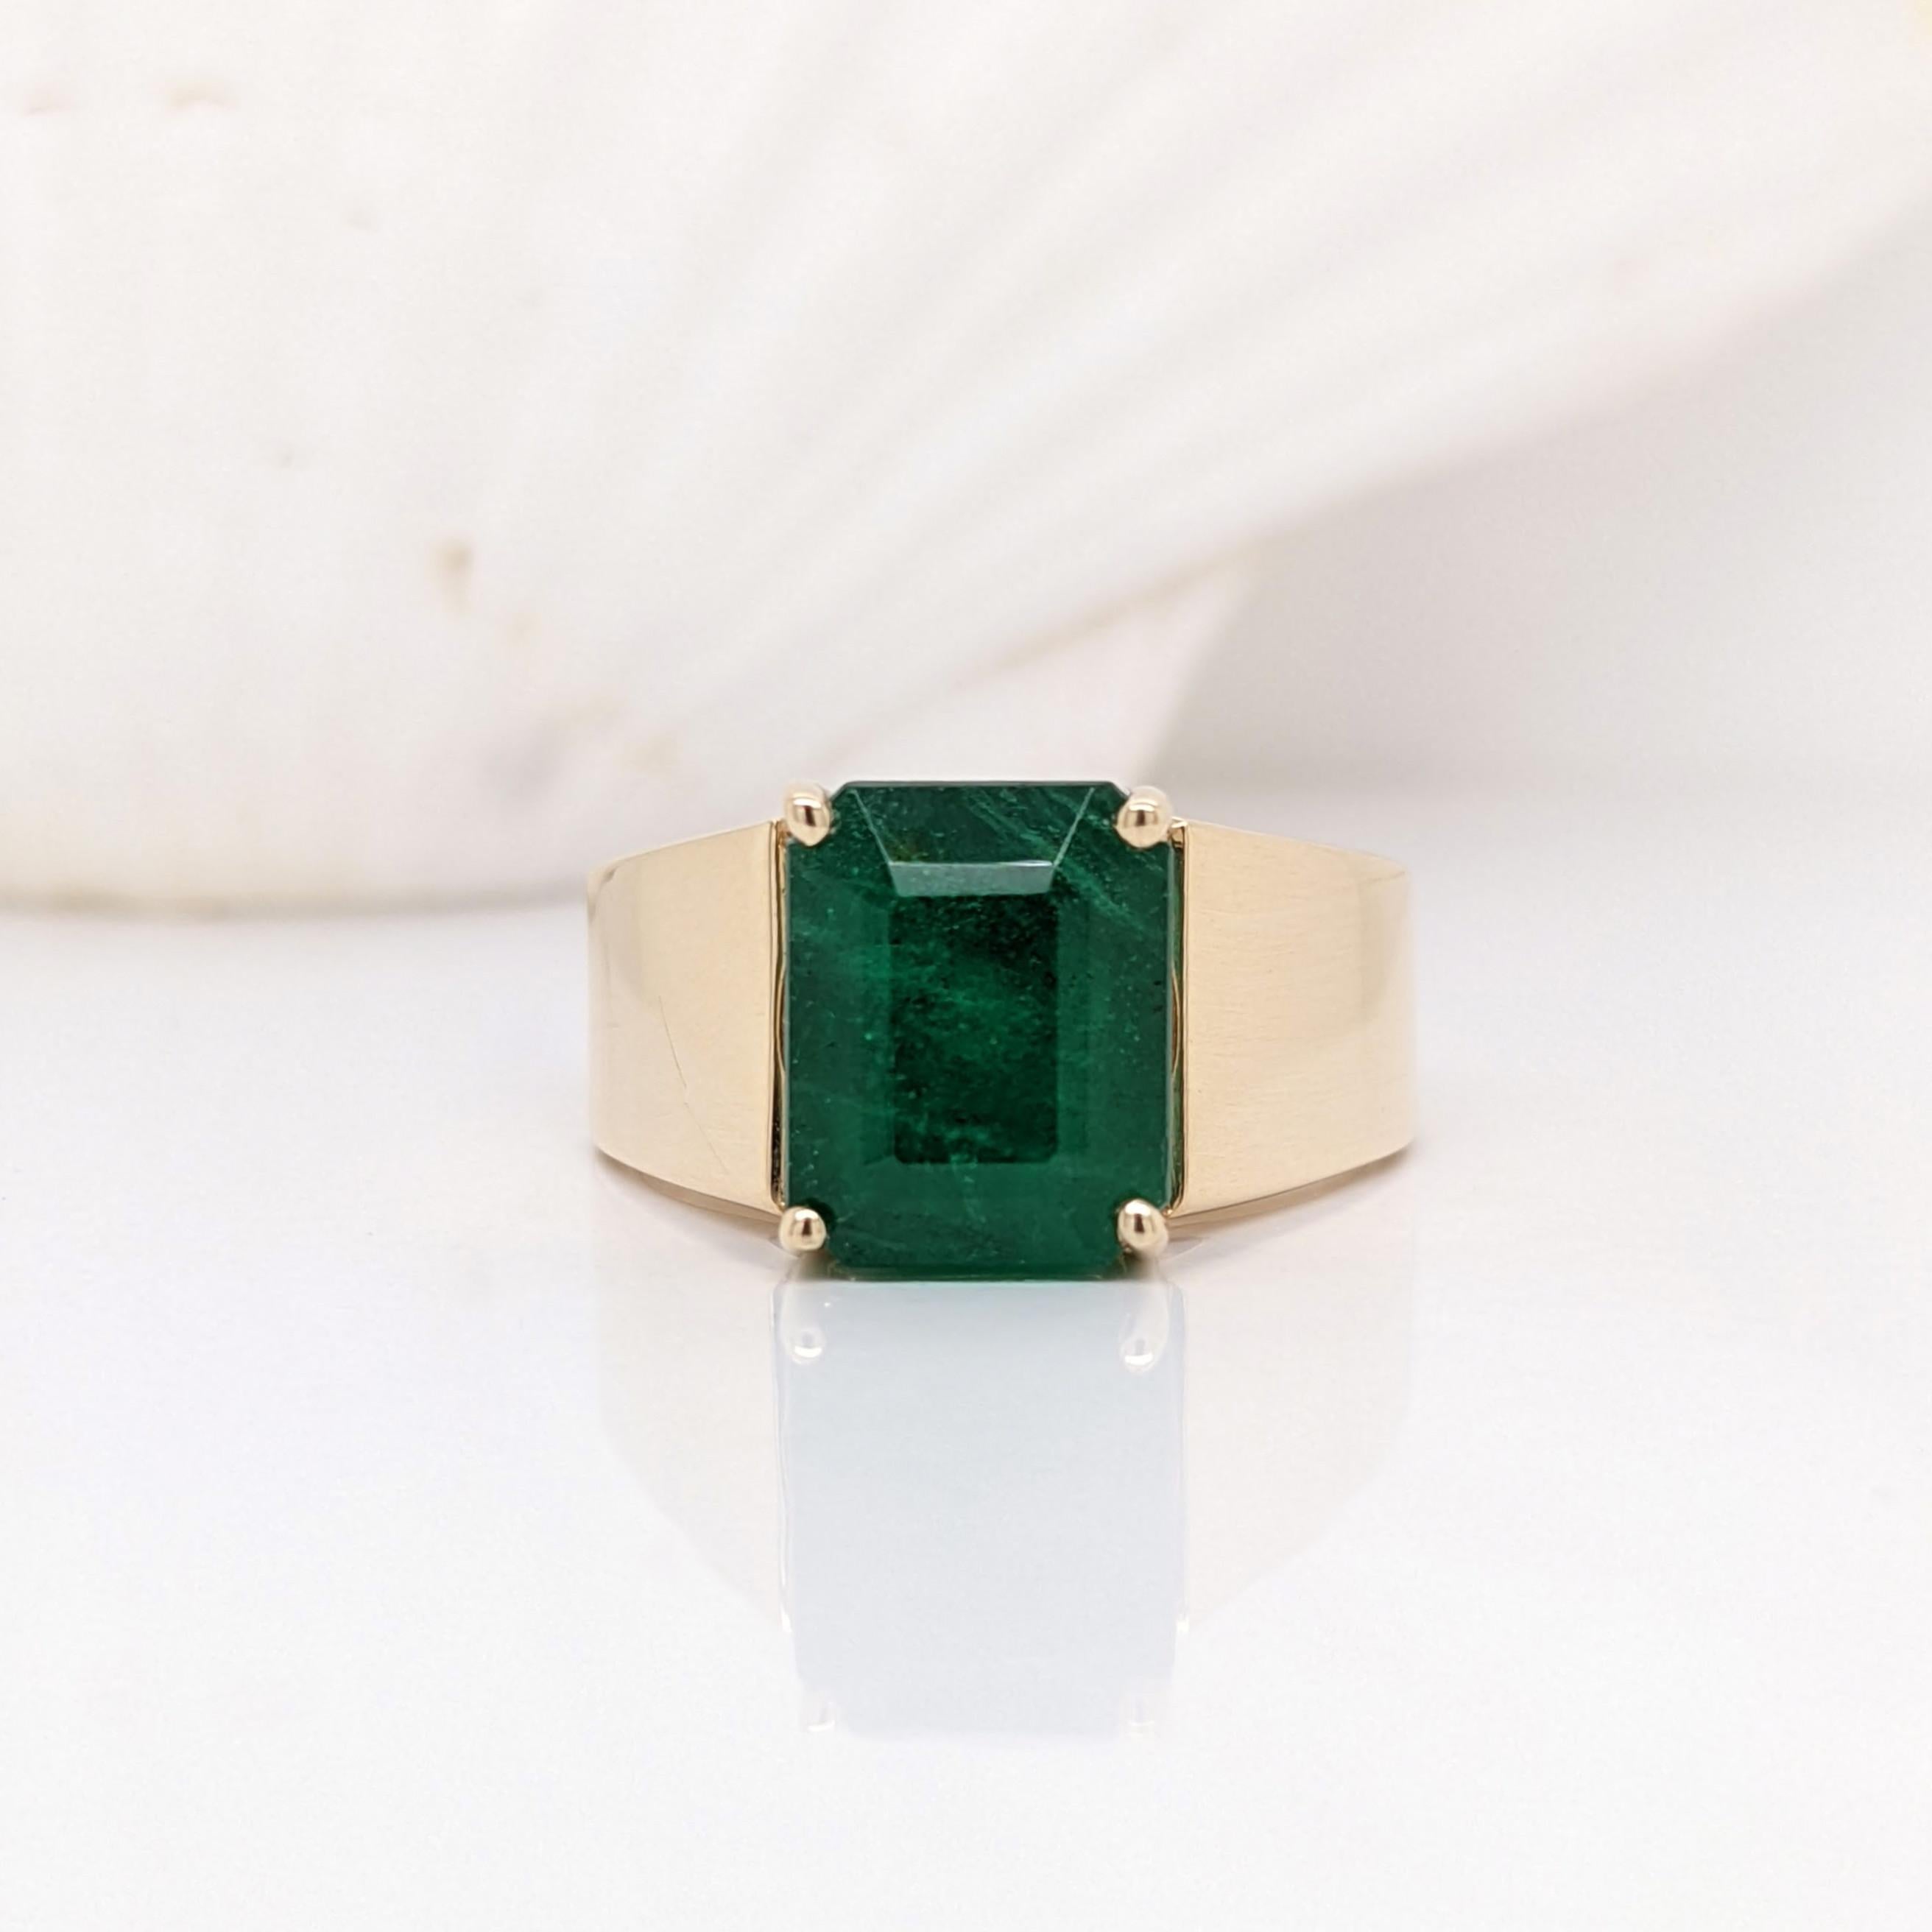 Stone Type: Emerald
Origin: Zambia
Treatment: Oiled
Hardness: 7.5
Shape: Emerald Cut
Size: 10x8mm
Weight: 6.84cts
Metal: Solid 14k/ 7.5gms
Sku: CigarBandRing/8436

This timeless cigar band ring features a high quality 10x8mm emerald, held perfectly